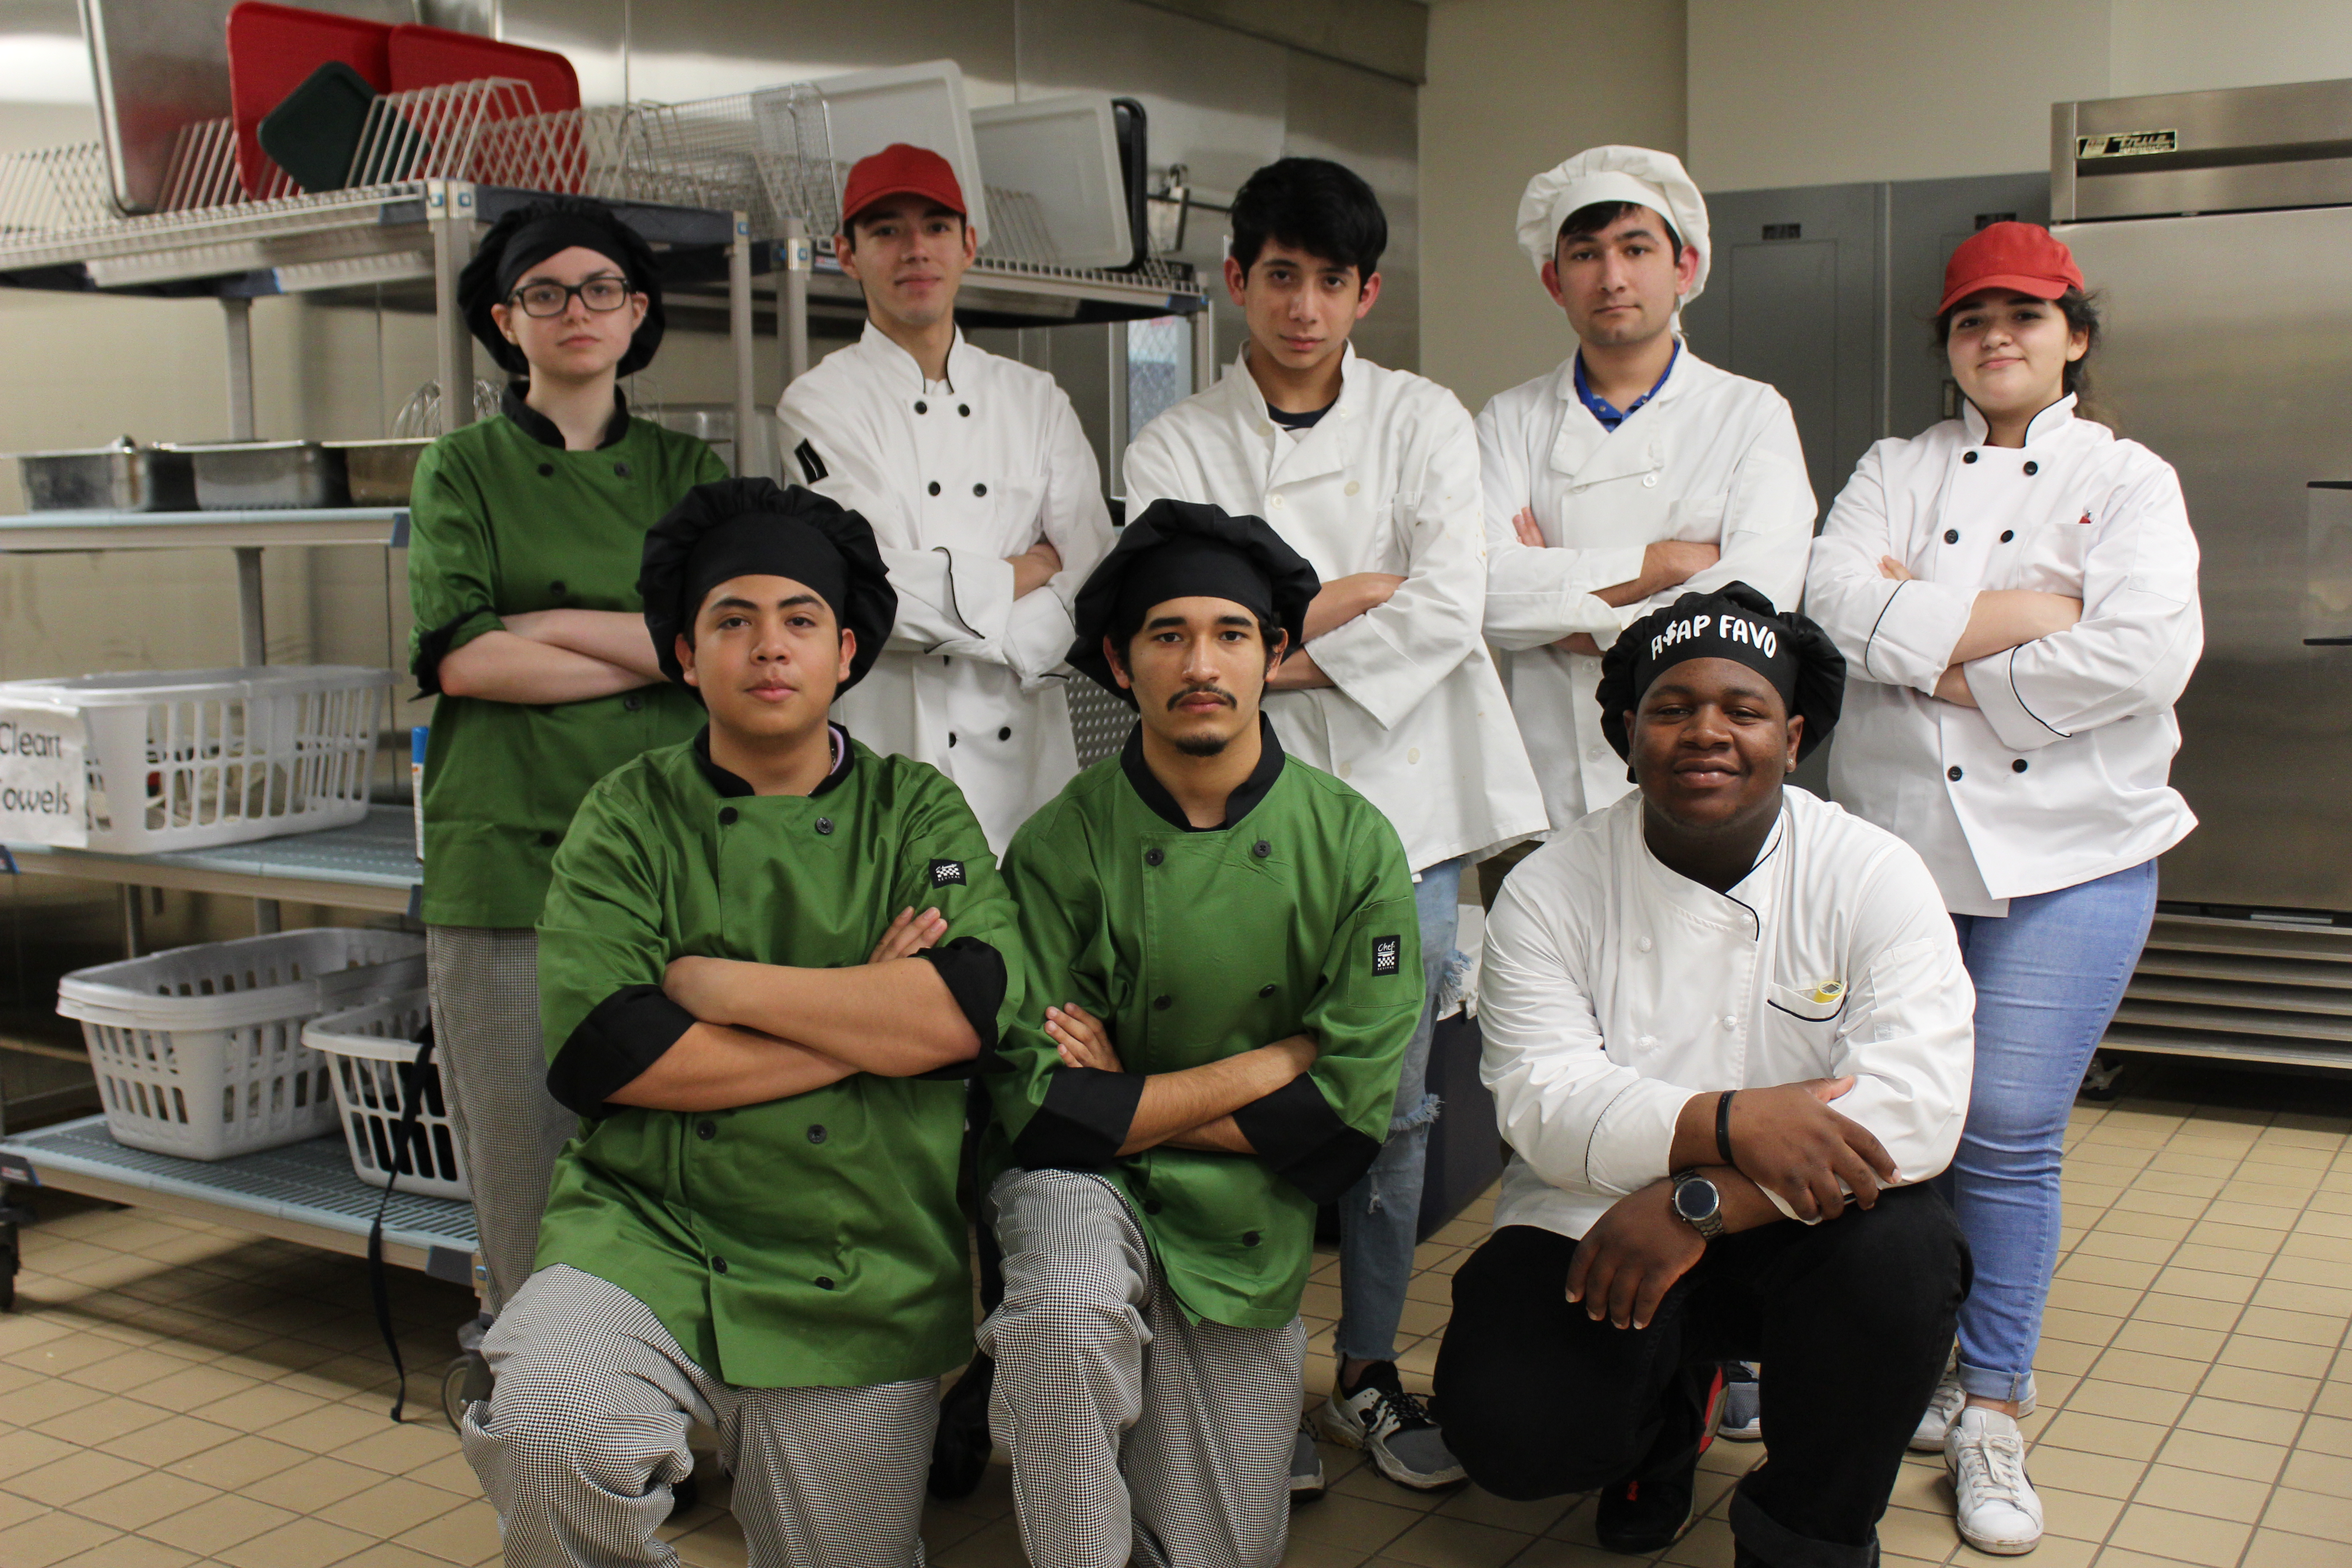 Culinary students from Lee, Sterling and Stuart Career Tech High Schools